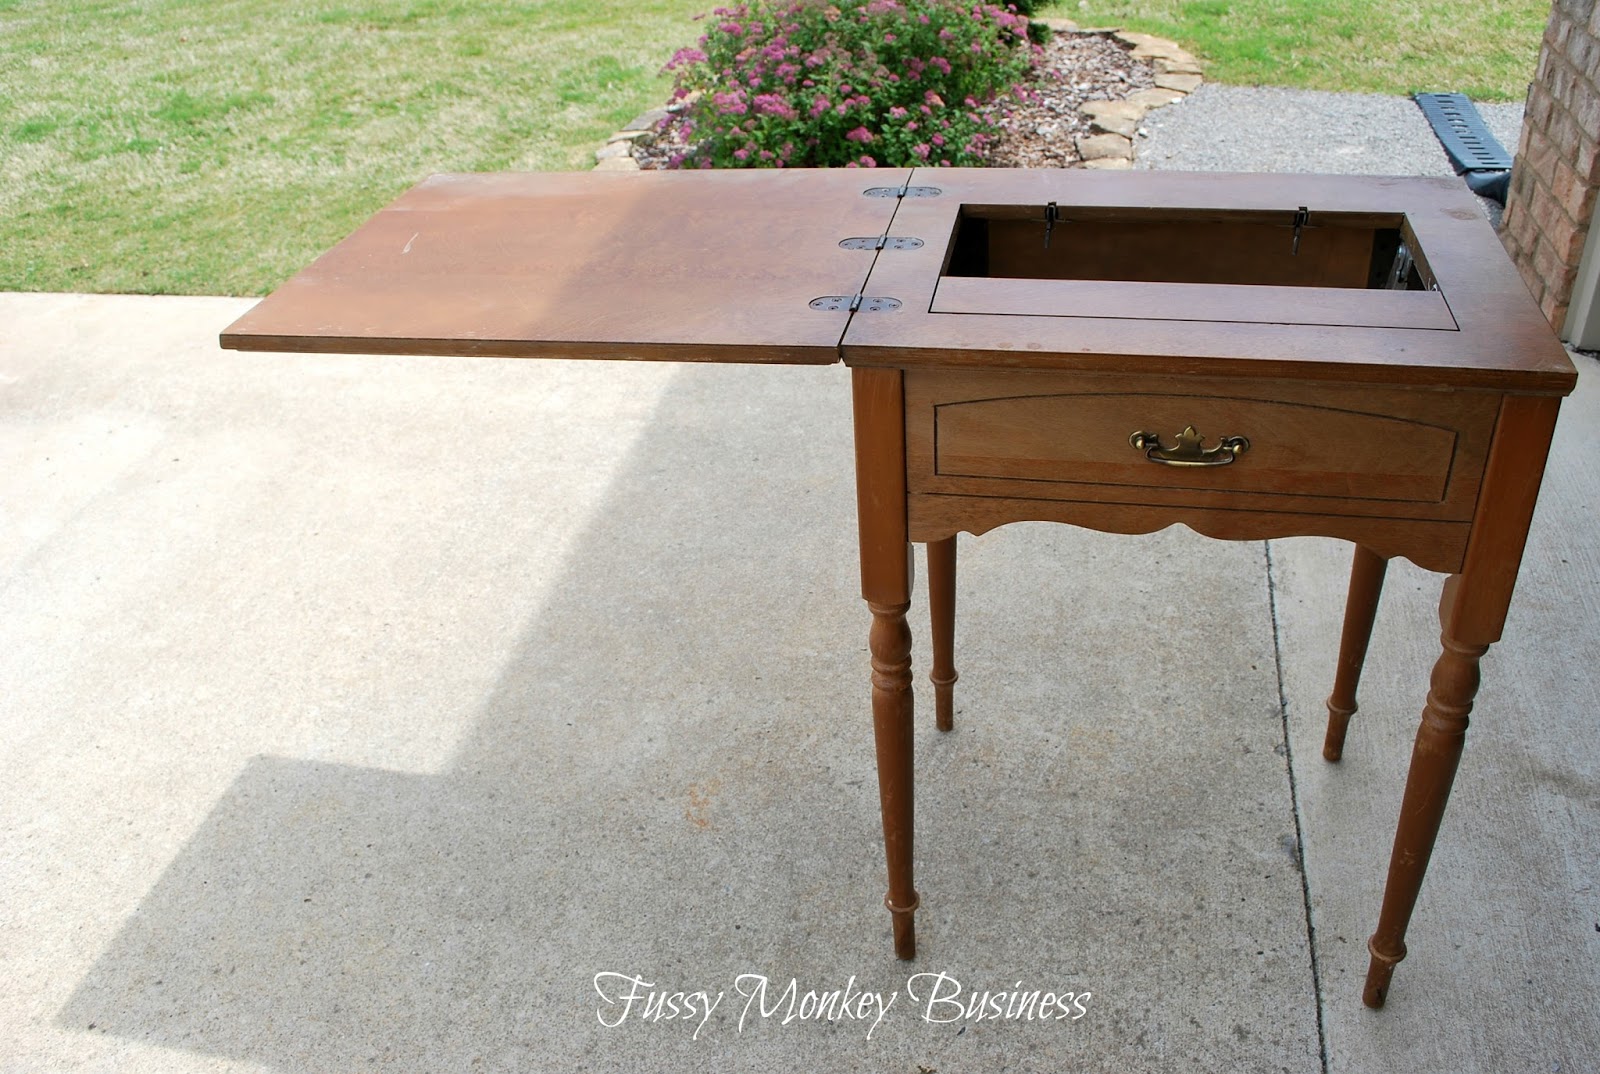 Fussy Monkey Business Old Sewing Machine Table Turned Outdoor Planter